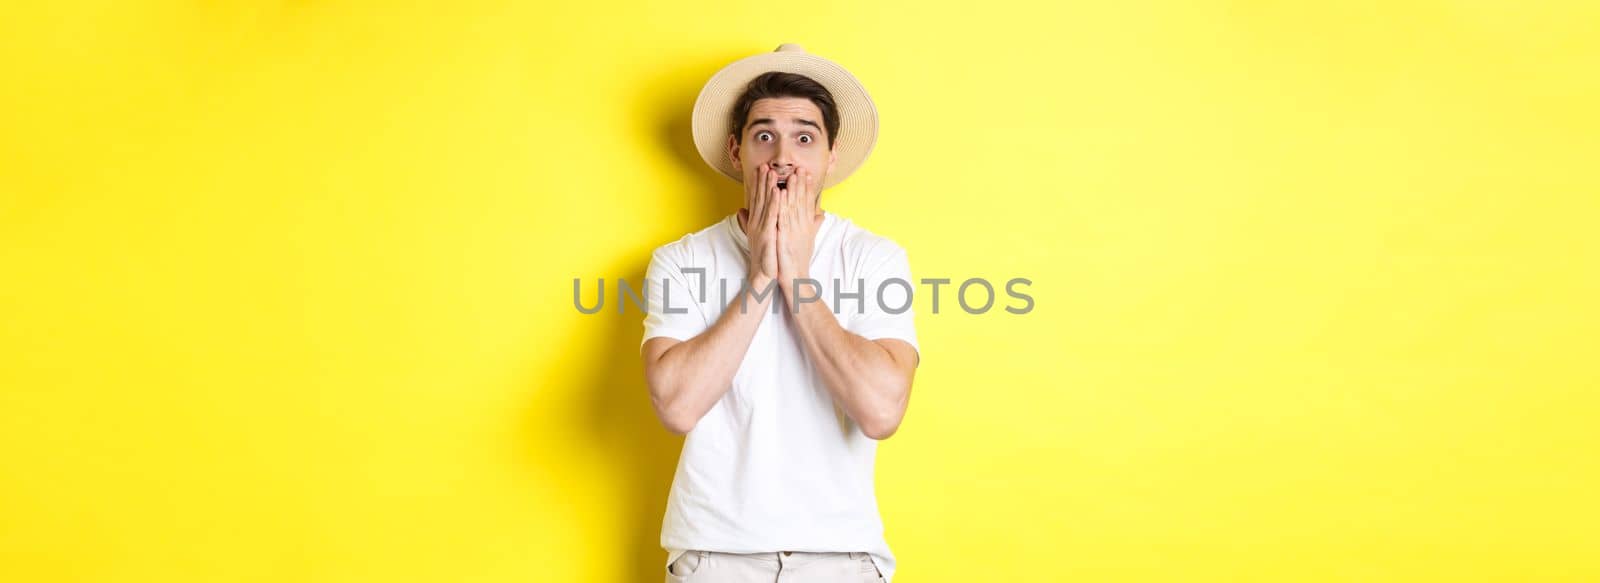 Concept of tourism and summer. Shocked guy jumping from fear, standing startled against yellow background.